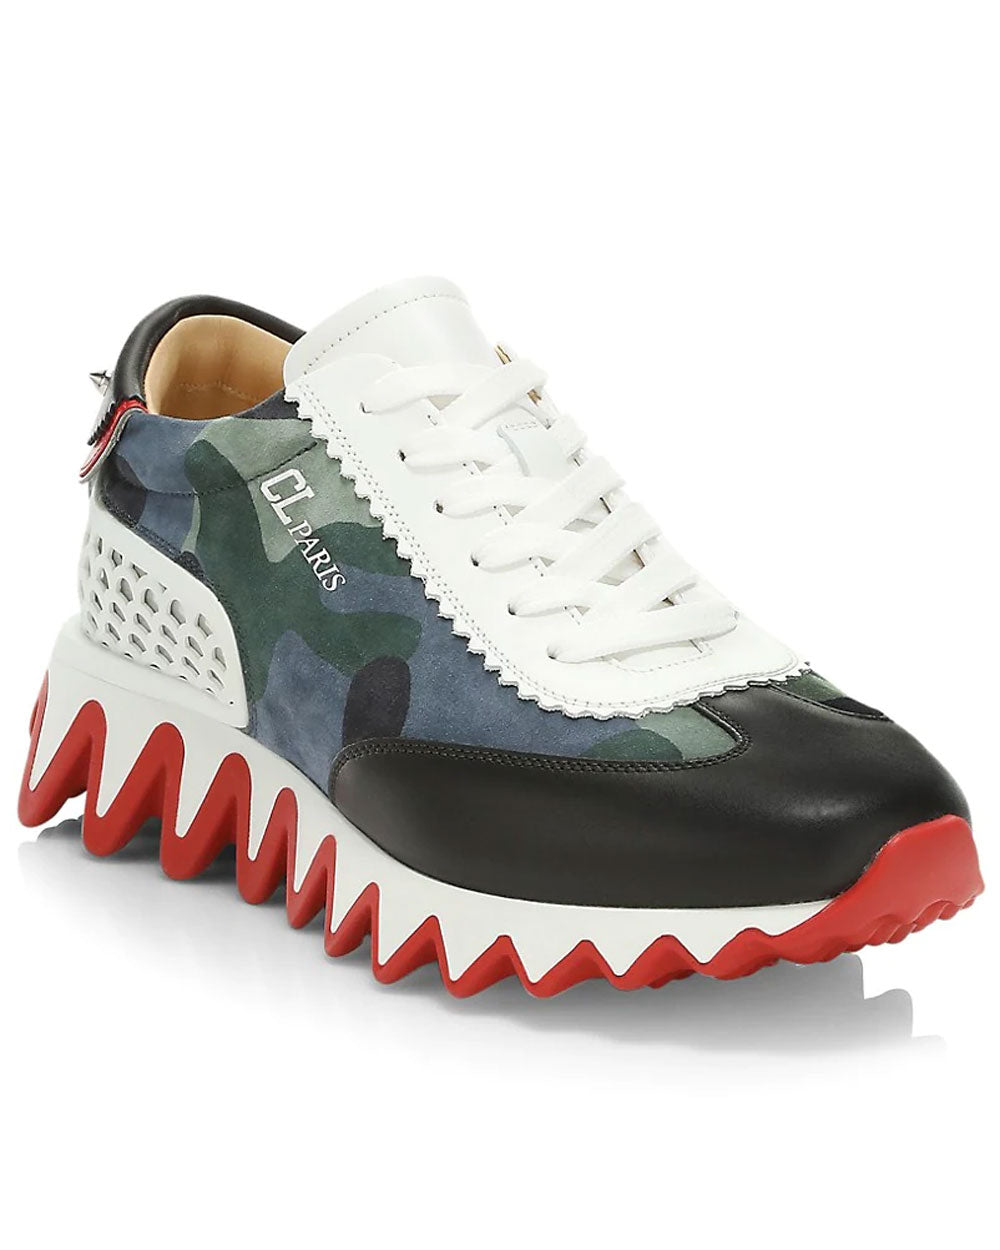 Christian Louboutin Loubishark Donna Leather Trainers in White